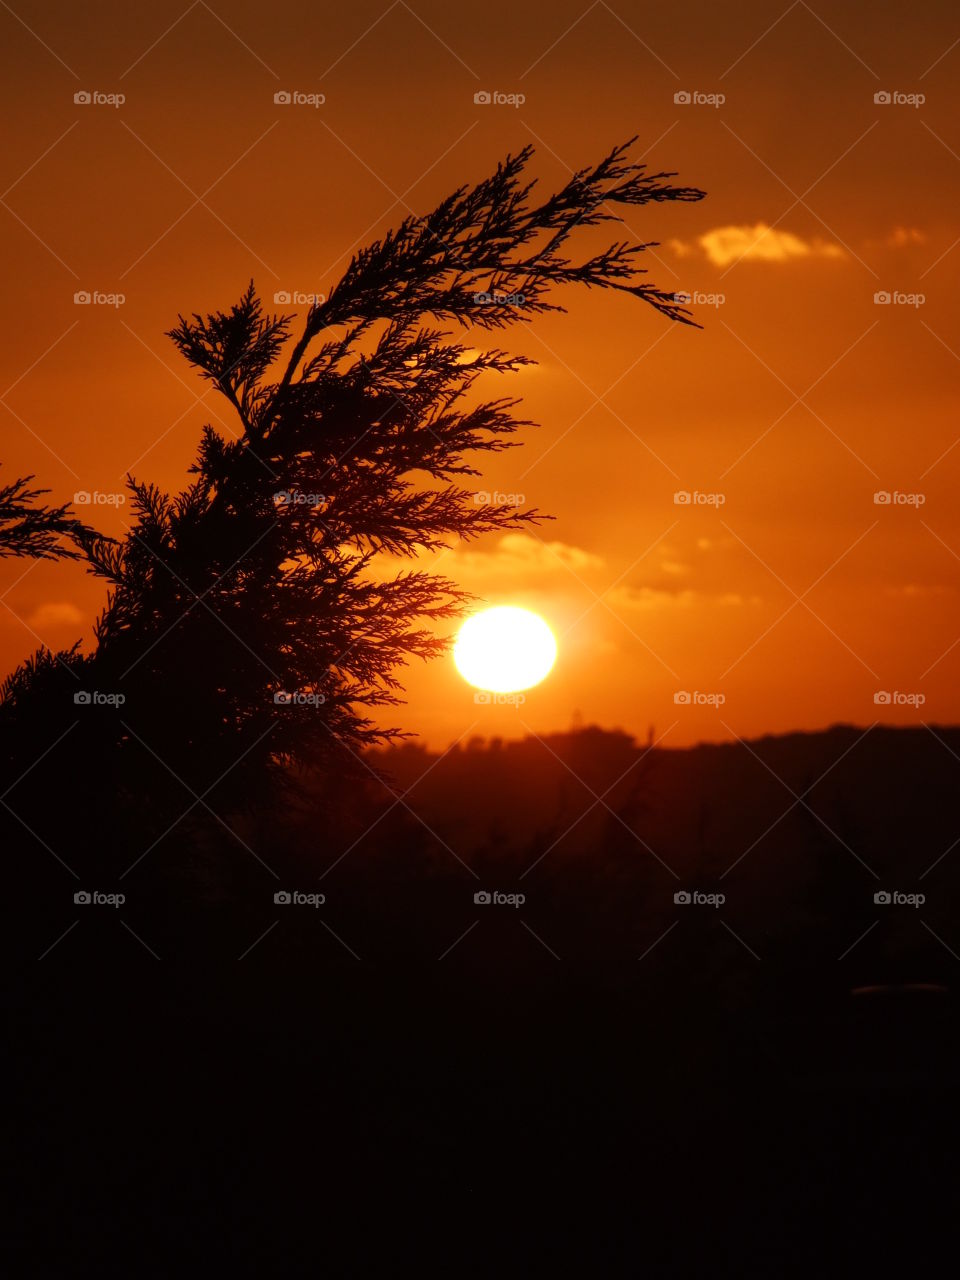 Full sun and tree branch